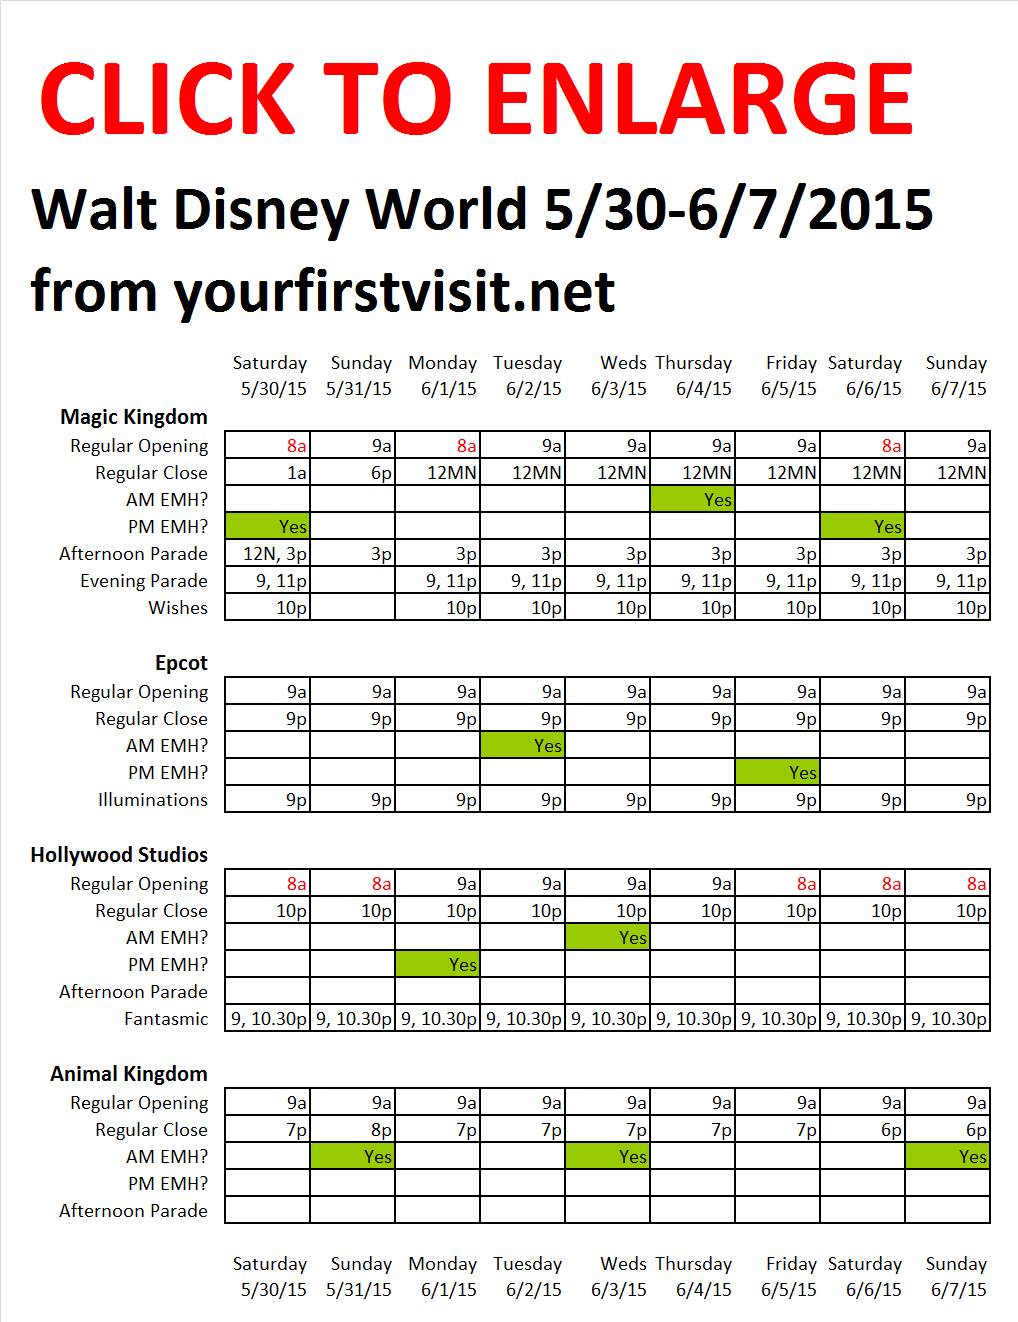 Disney World May 30 to June 7 2015 from yourfirstvisit.net